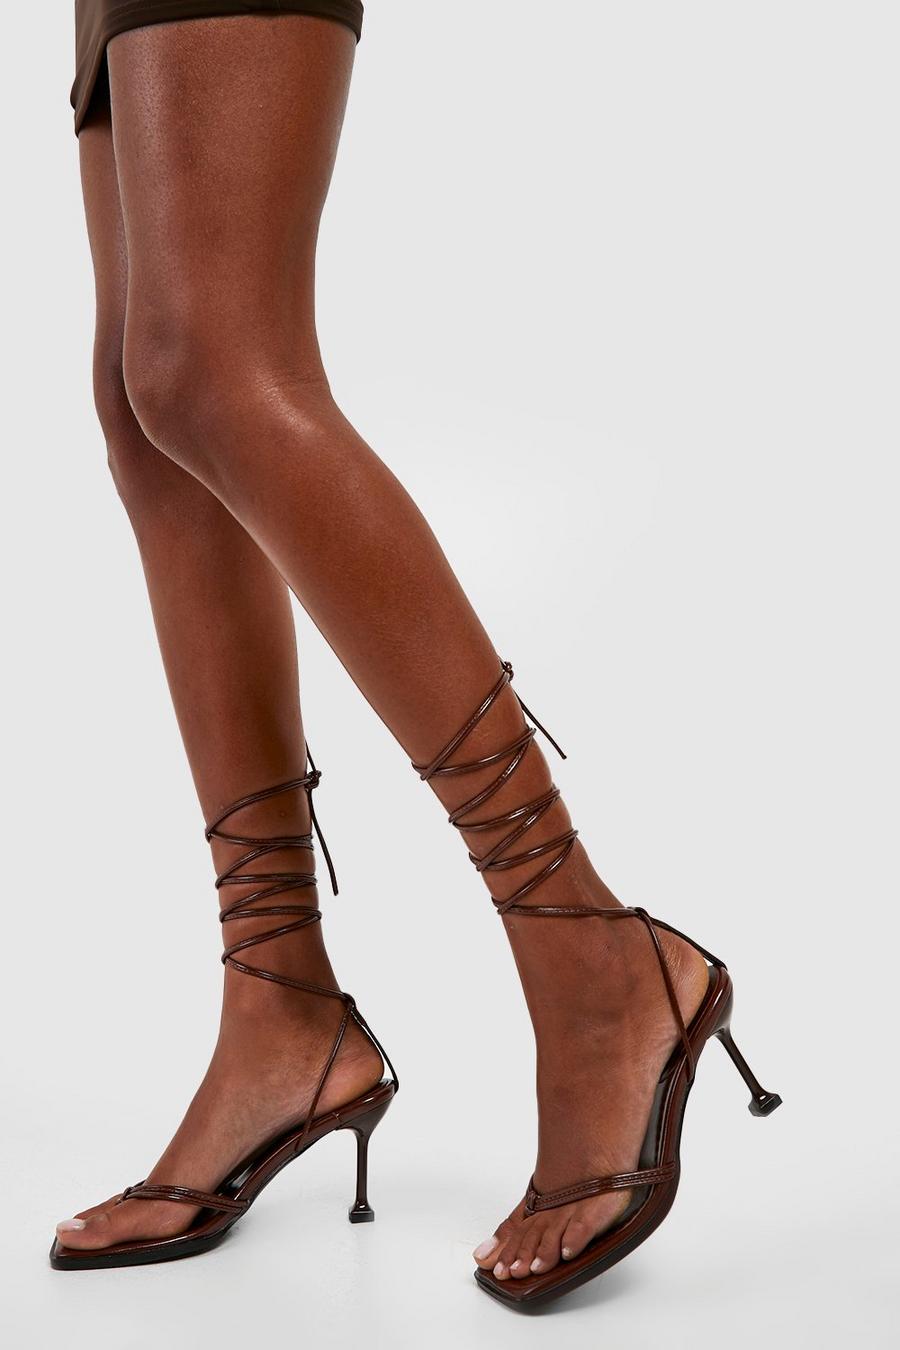 Chocolate marron Padded Insole Strappy Lace Up Heels